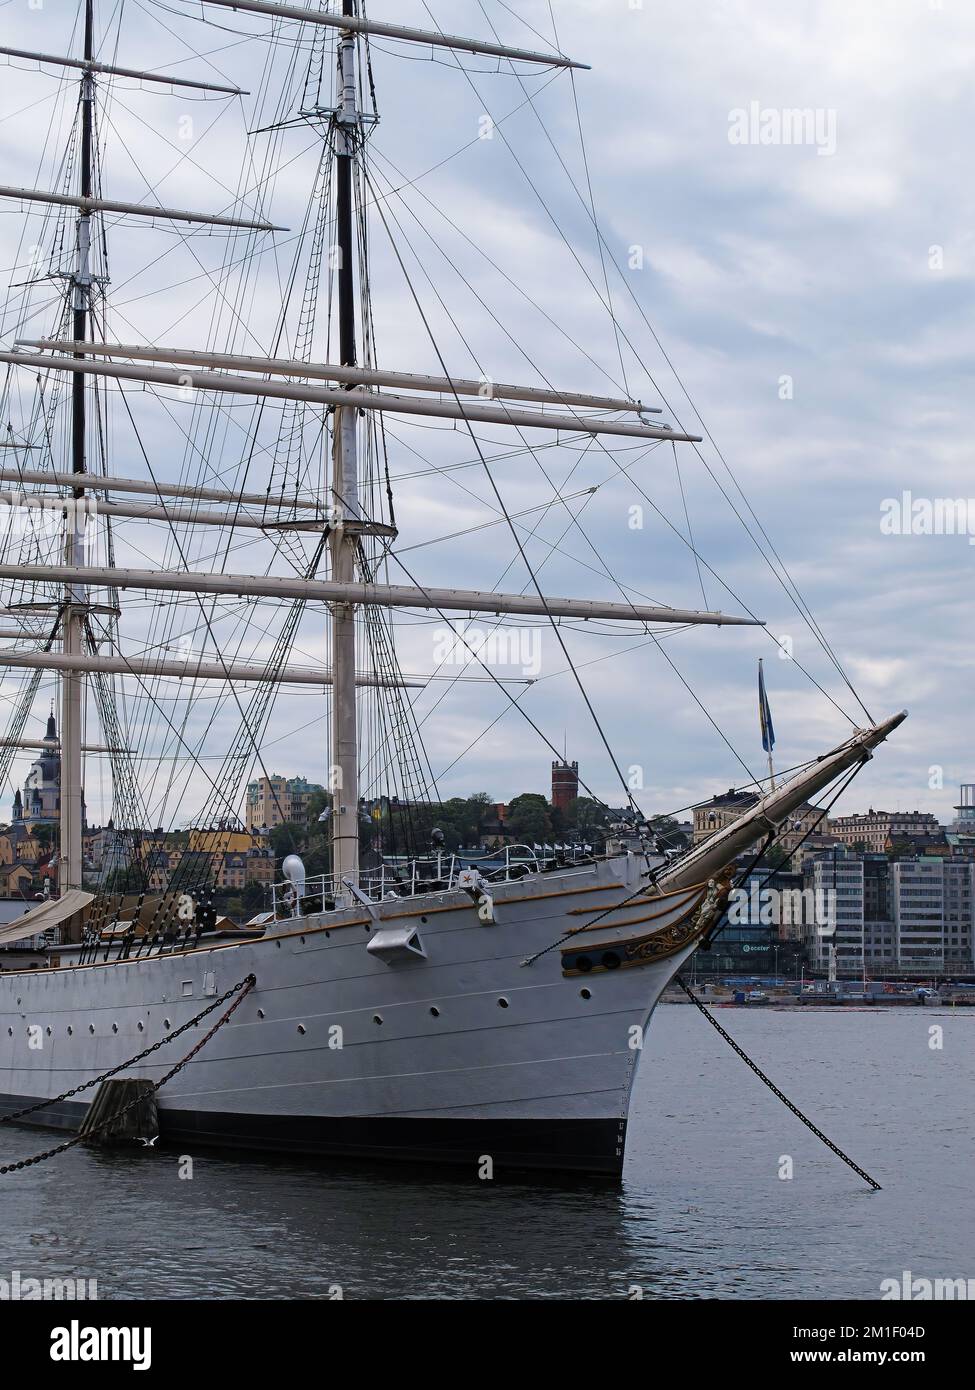 Stockholm, Sweden - July 12, 2018: large sailing ship with several masts in the harbor Stock Photo